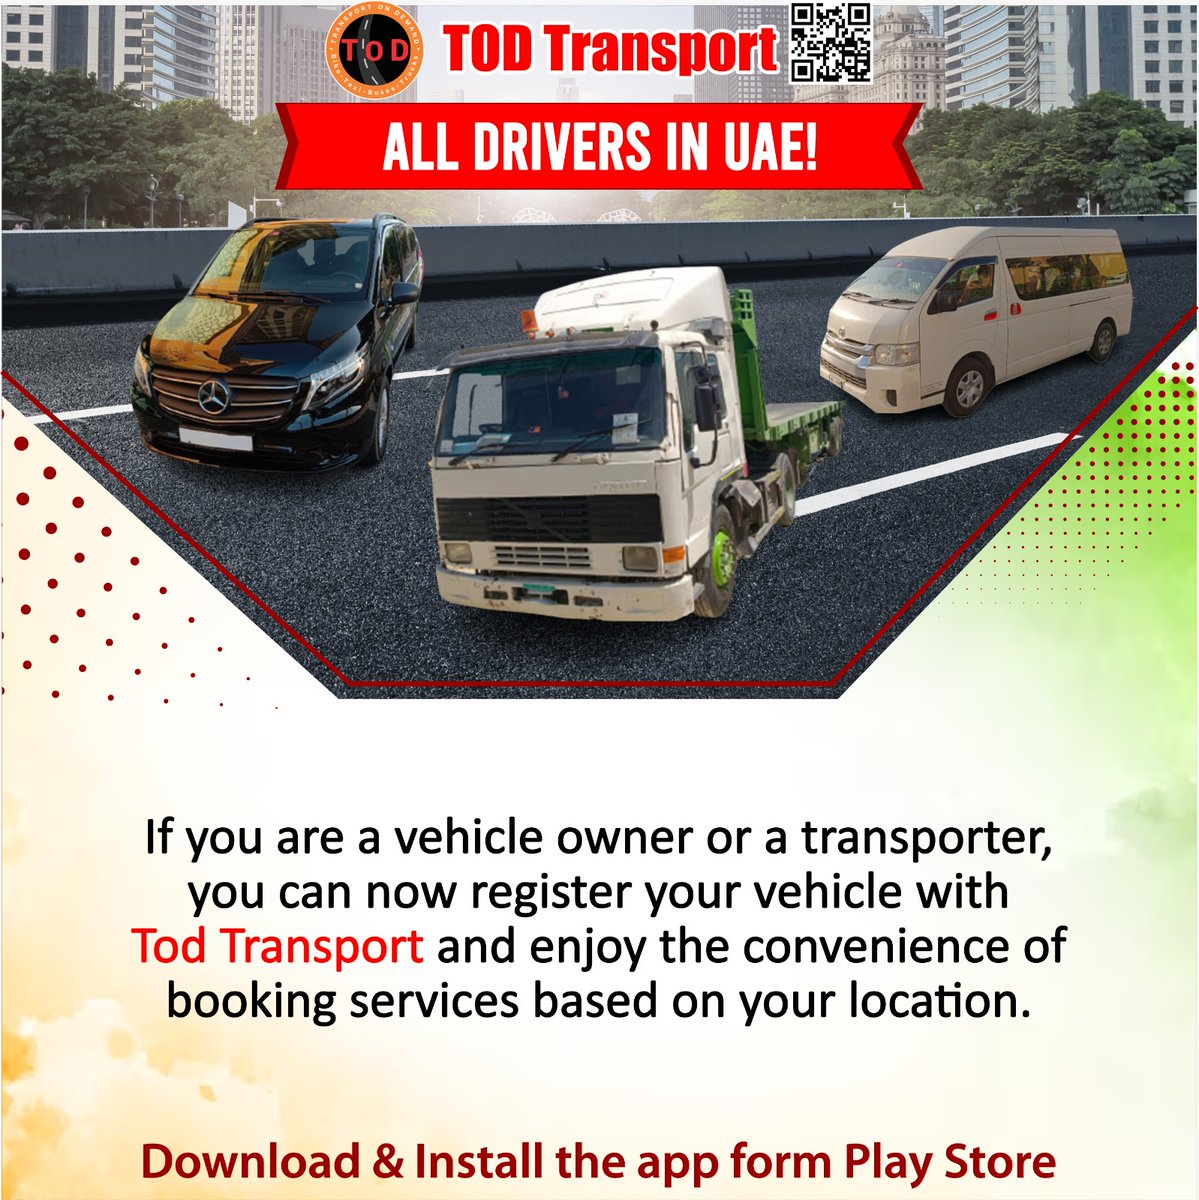 🚚📲 Attention vehicle owners and transporters! Unlock 6 MONTHS of FREE bookings by registering with TOD Transport UAE. Seamlessly book services tailored to your location and enjoy convenience like never before. Join us today! #TODTransportUAE #EffortlessTravel #SmartBooking